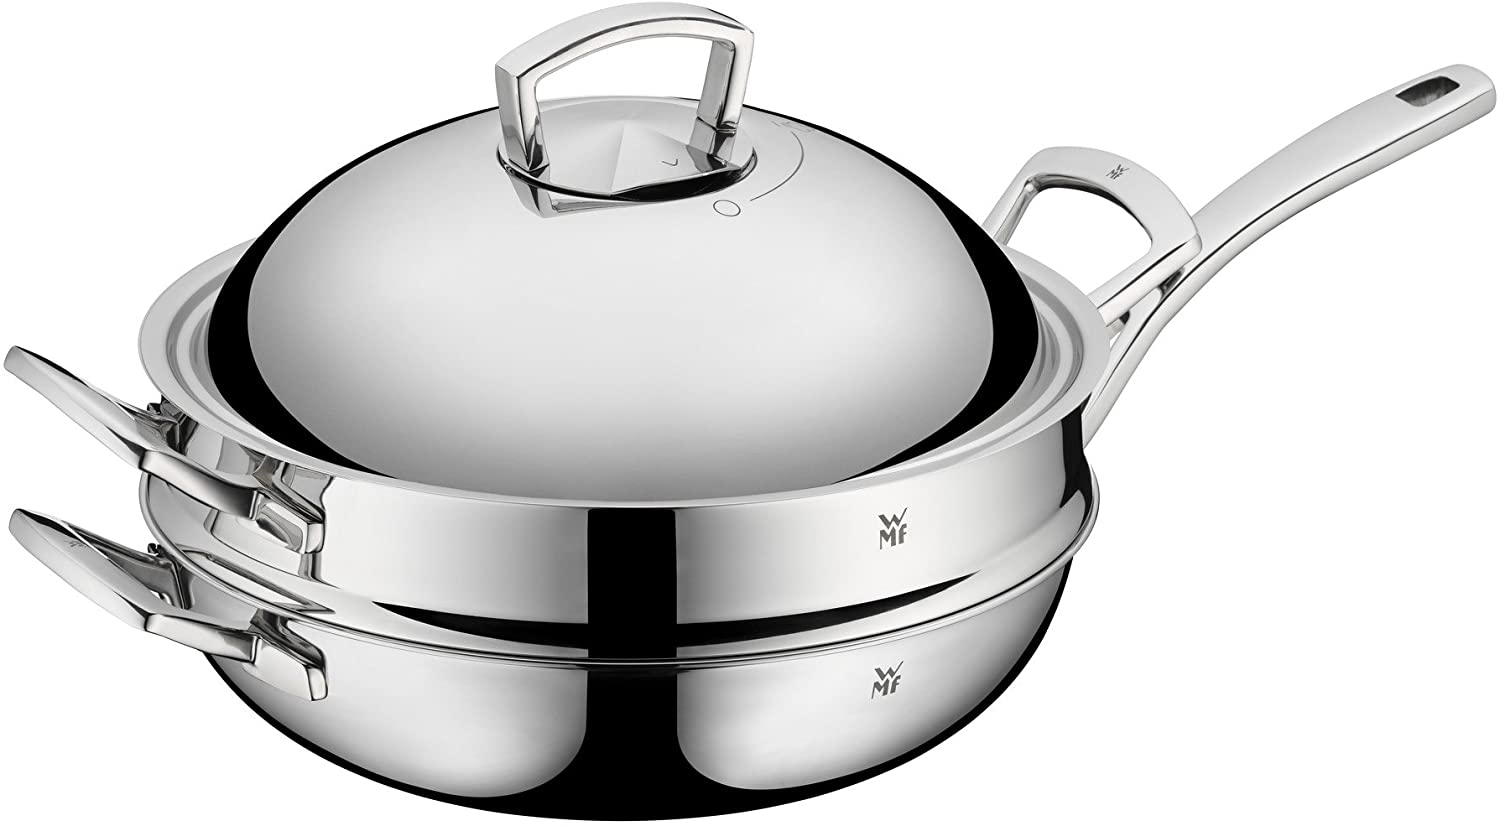 WMF Stainless Steel Wok 32 Cm With Steaming Insert